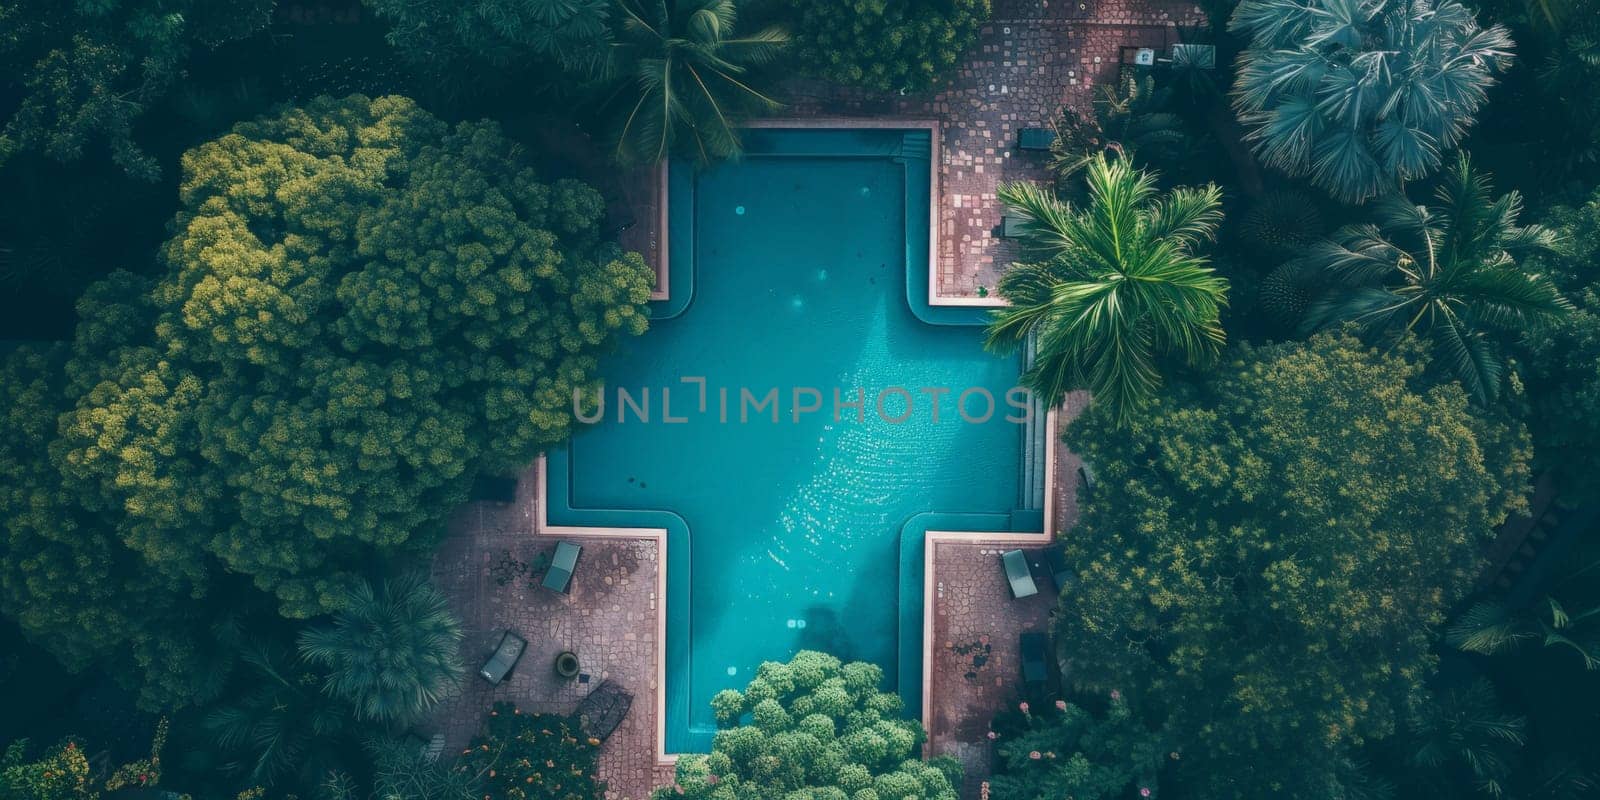 A pool with a cross design in the middle of a forest. The pool is surrounded by trees and has a greenish tint to it